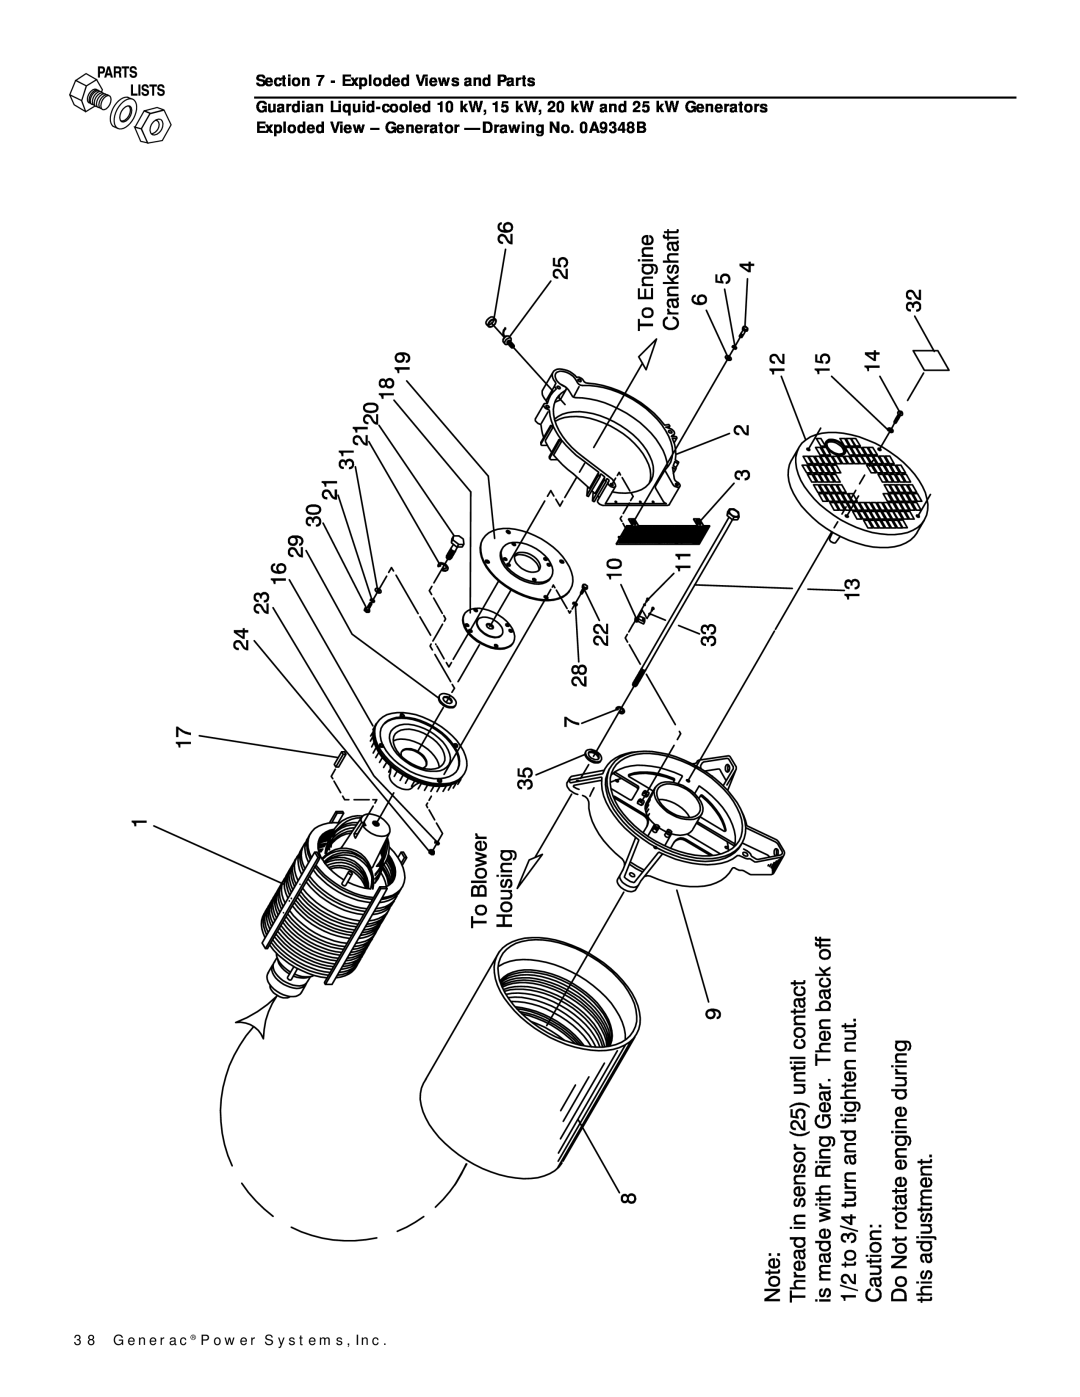 Generac Power Systems owner manual Exploded Views and Parts, Generac Power Systems, Inc 